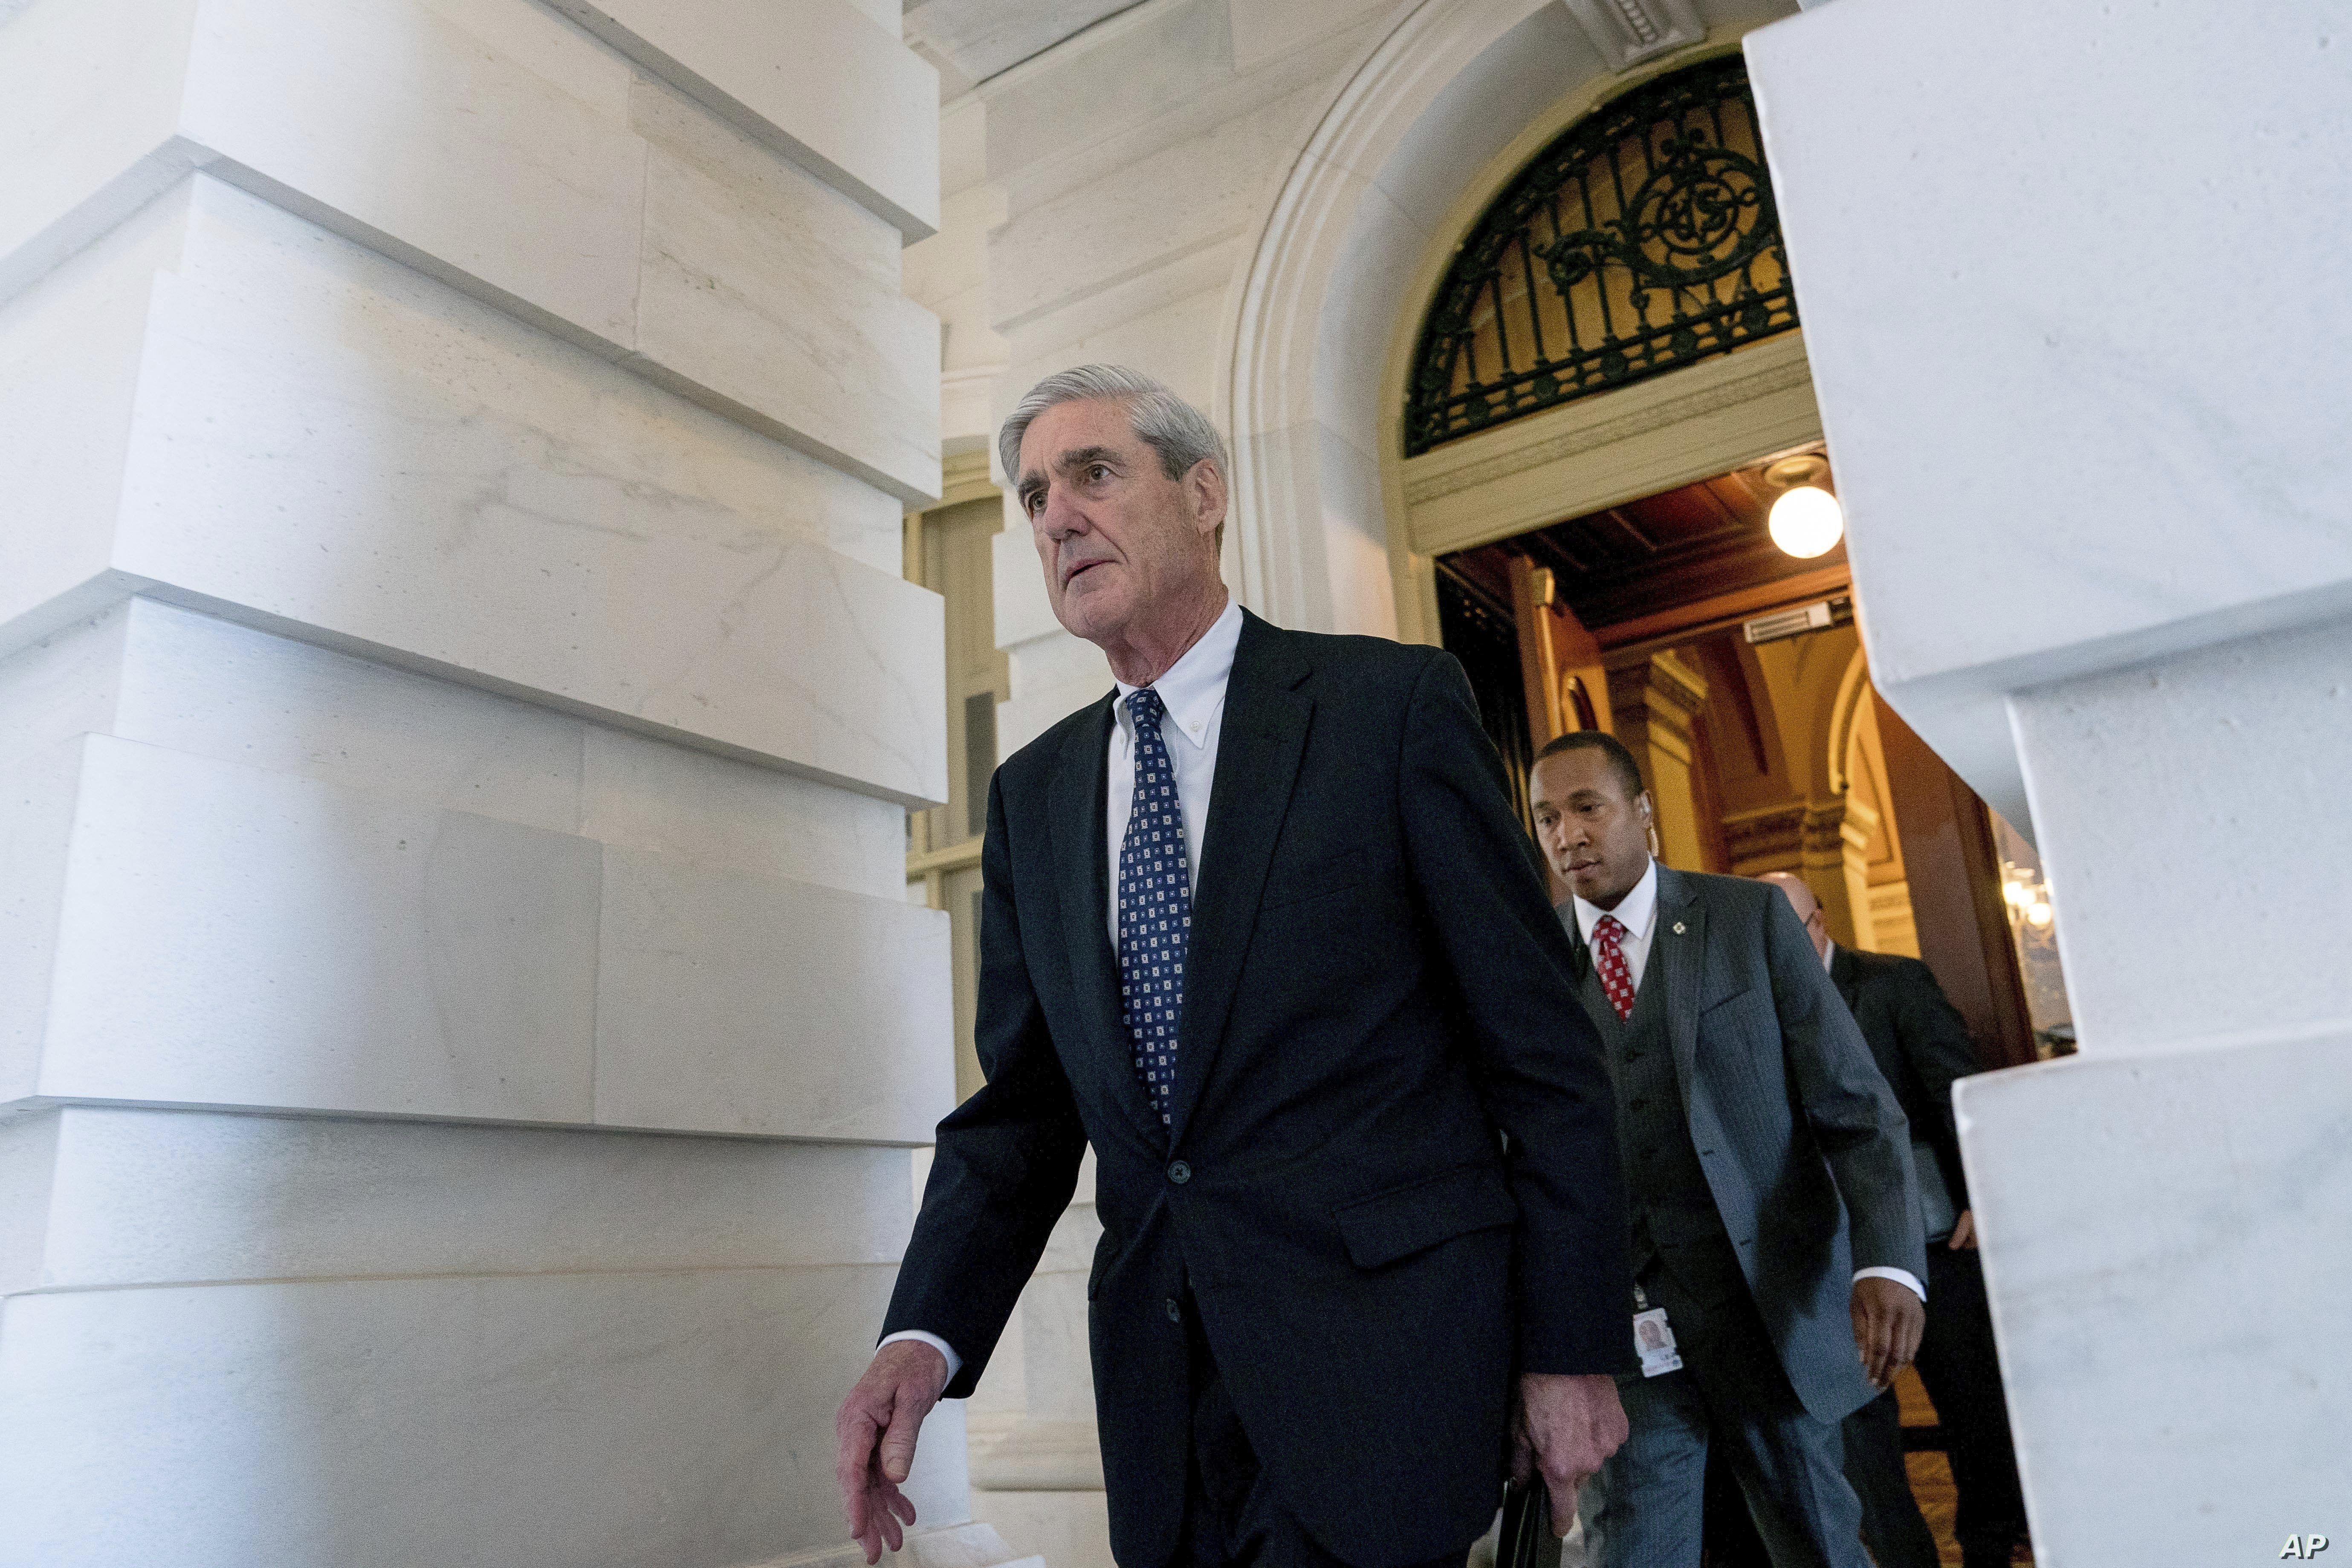 Robert Mueller, then-special counsel probing Russian interference in the 2016 election, departs Capitol Hill following a meeting with lawmakers, in Washington, June 21, 2017.